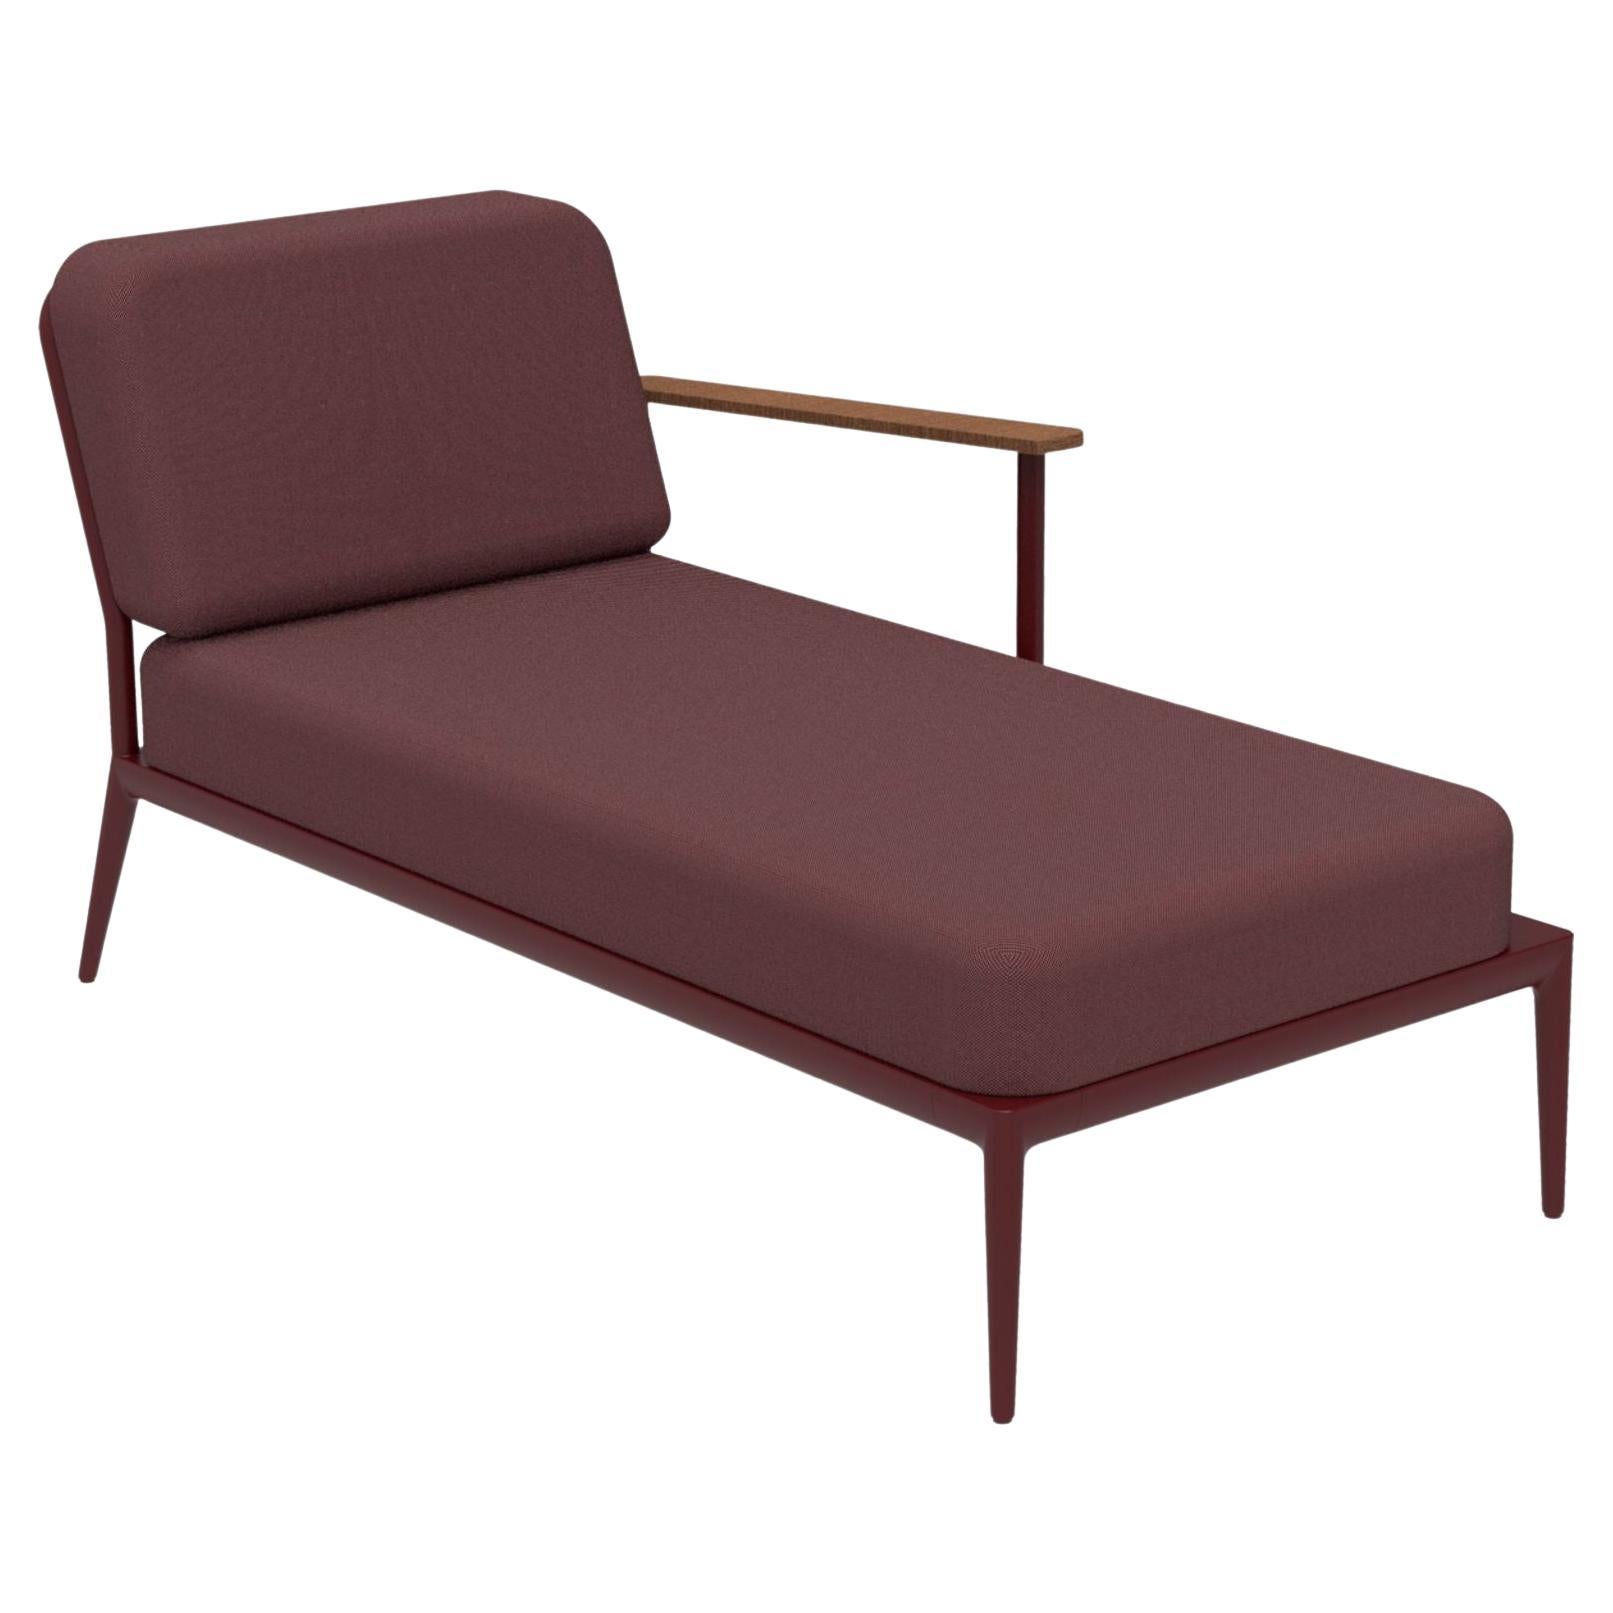 Nature Burgundy Left Chaise Lounge by Mowee For Sale